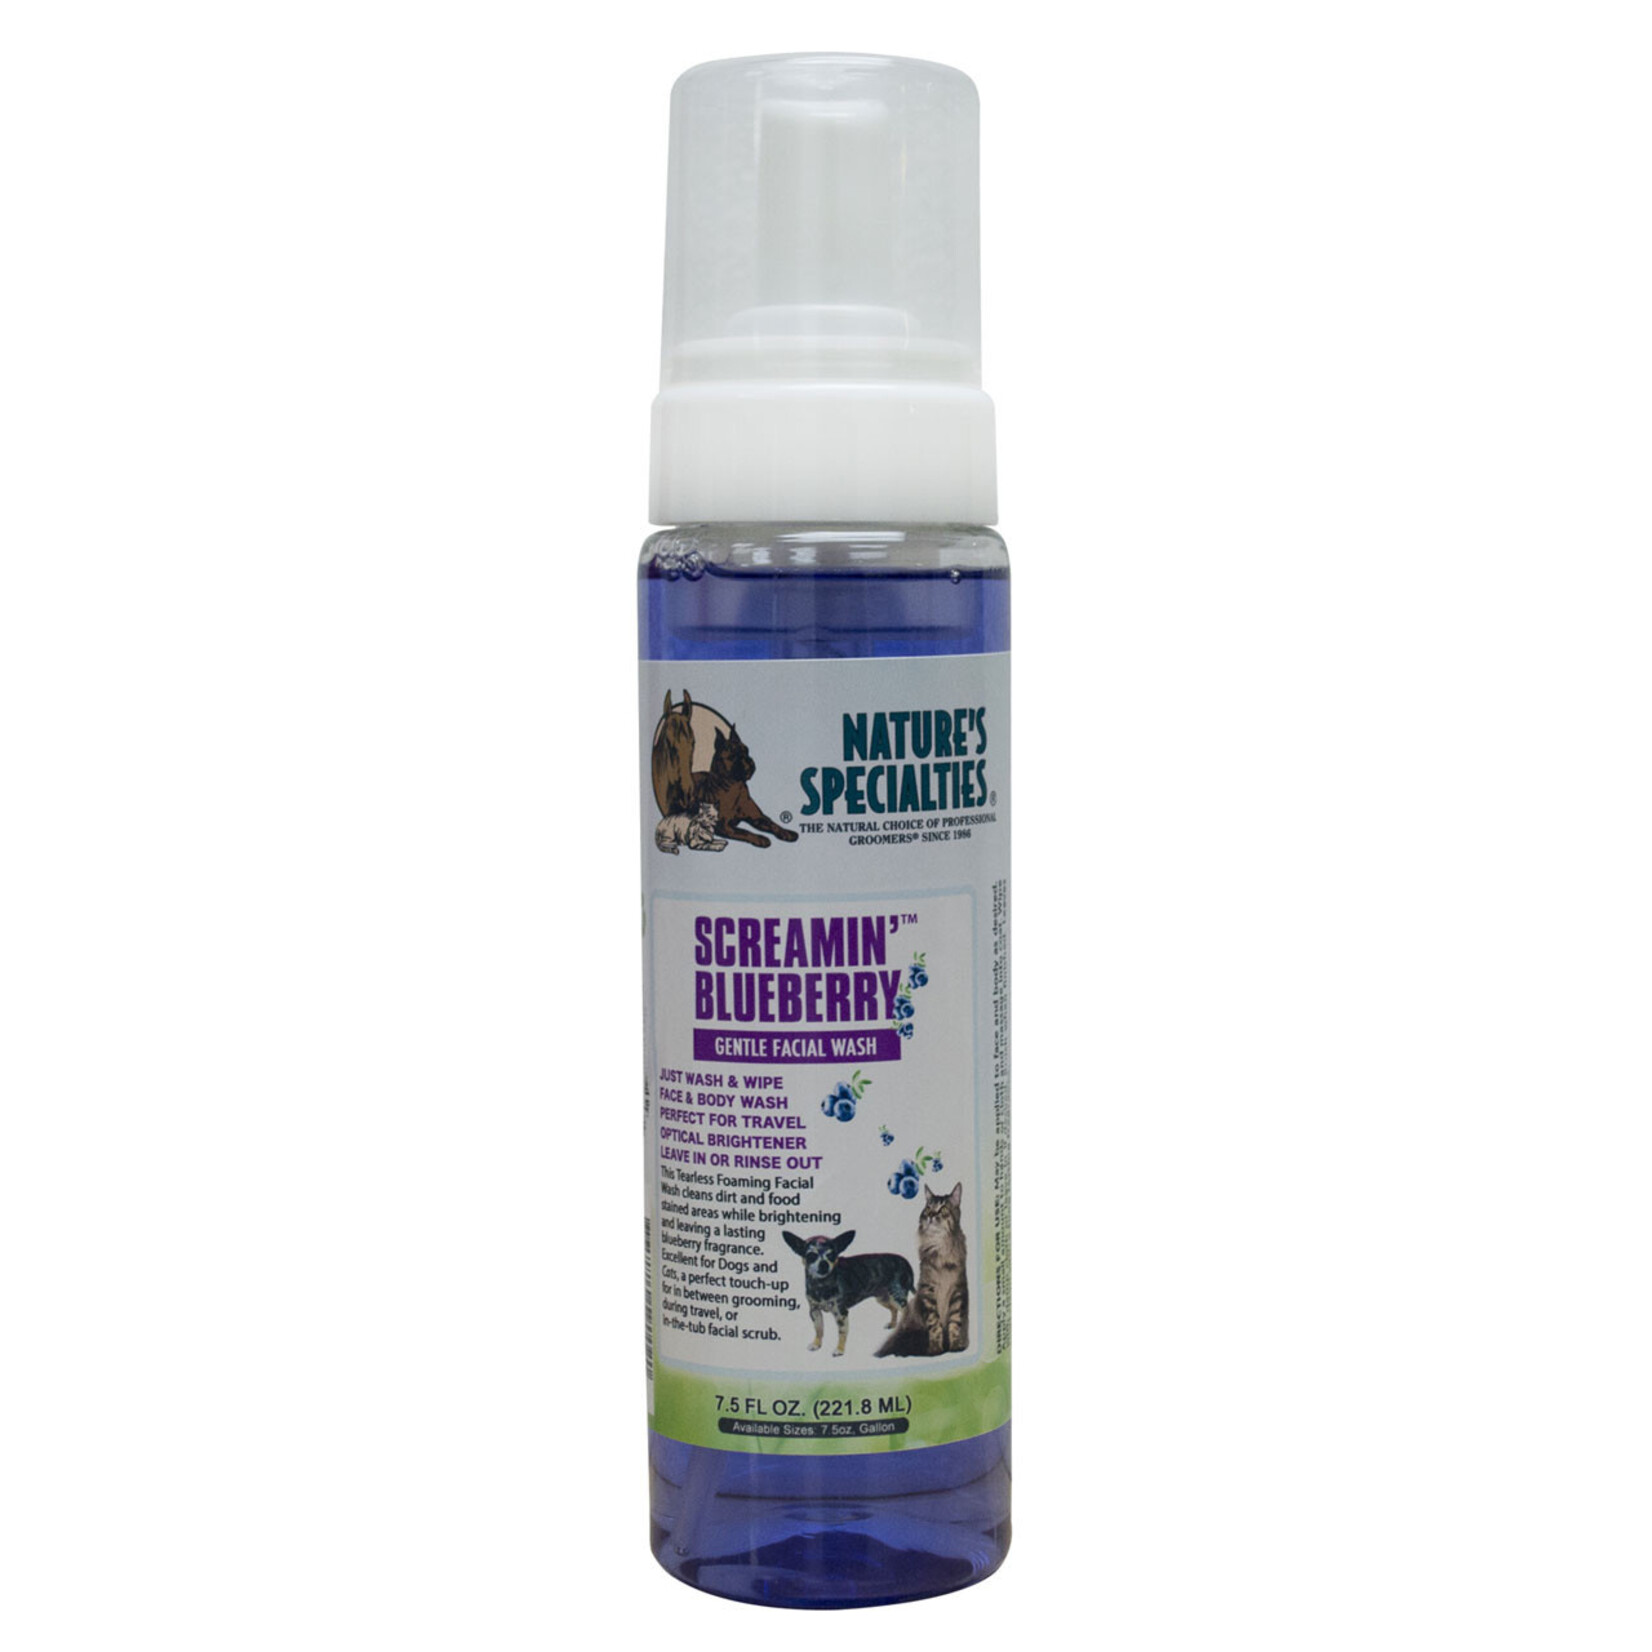 NATURE'S SPECIALTIES SCREAMIN' BLUEBERRY® FOR DOGS & CATS 7.5OZ